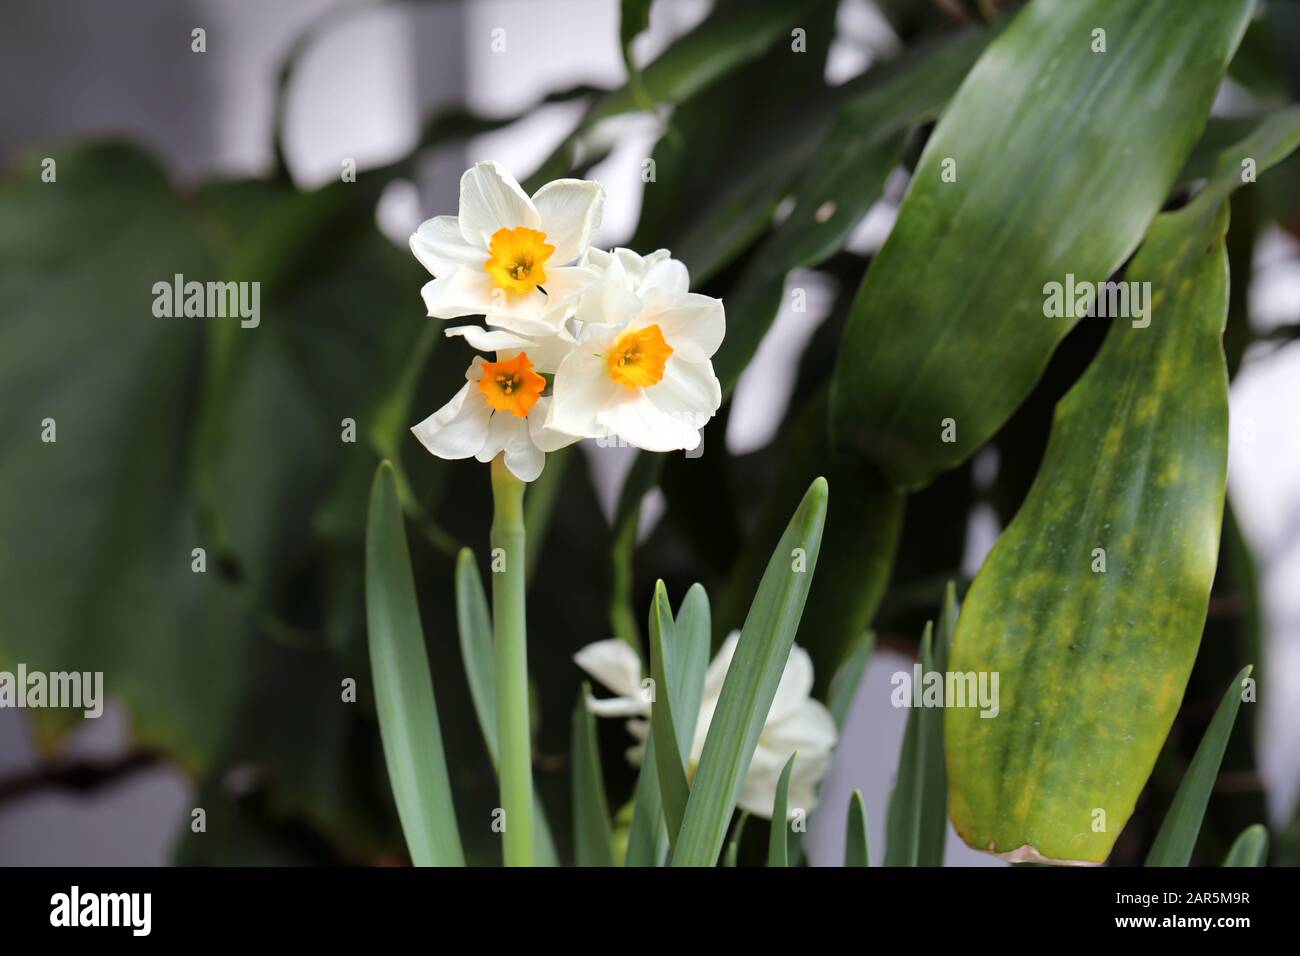 White and yellow bicolored blooming narcissus / daffodils flowers with green leaves. Perfect flowers for celebrating Easter and enjoying early spring. Stock Photo